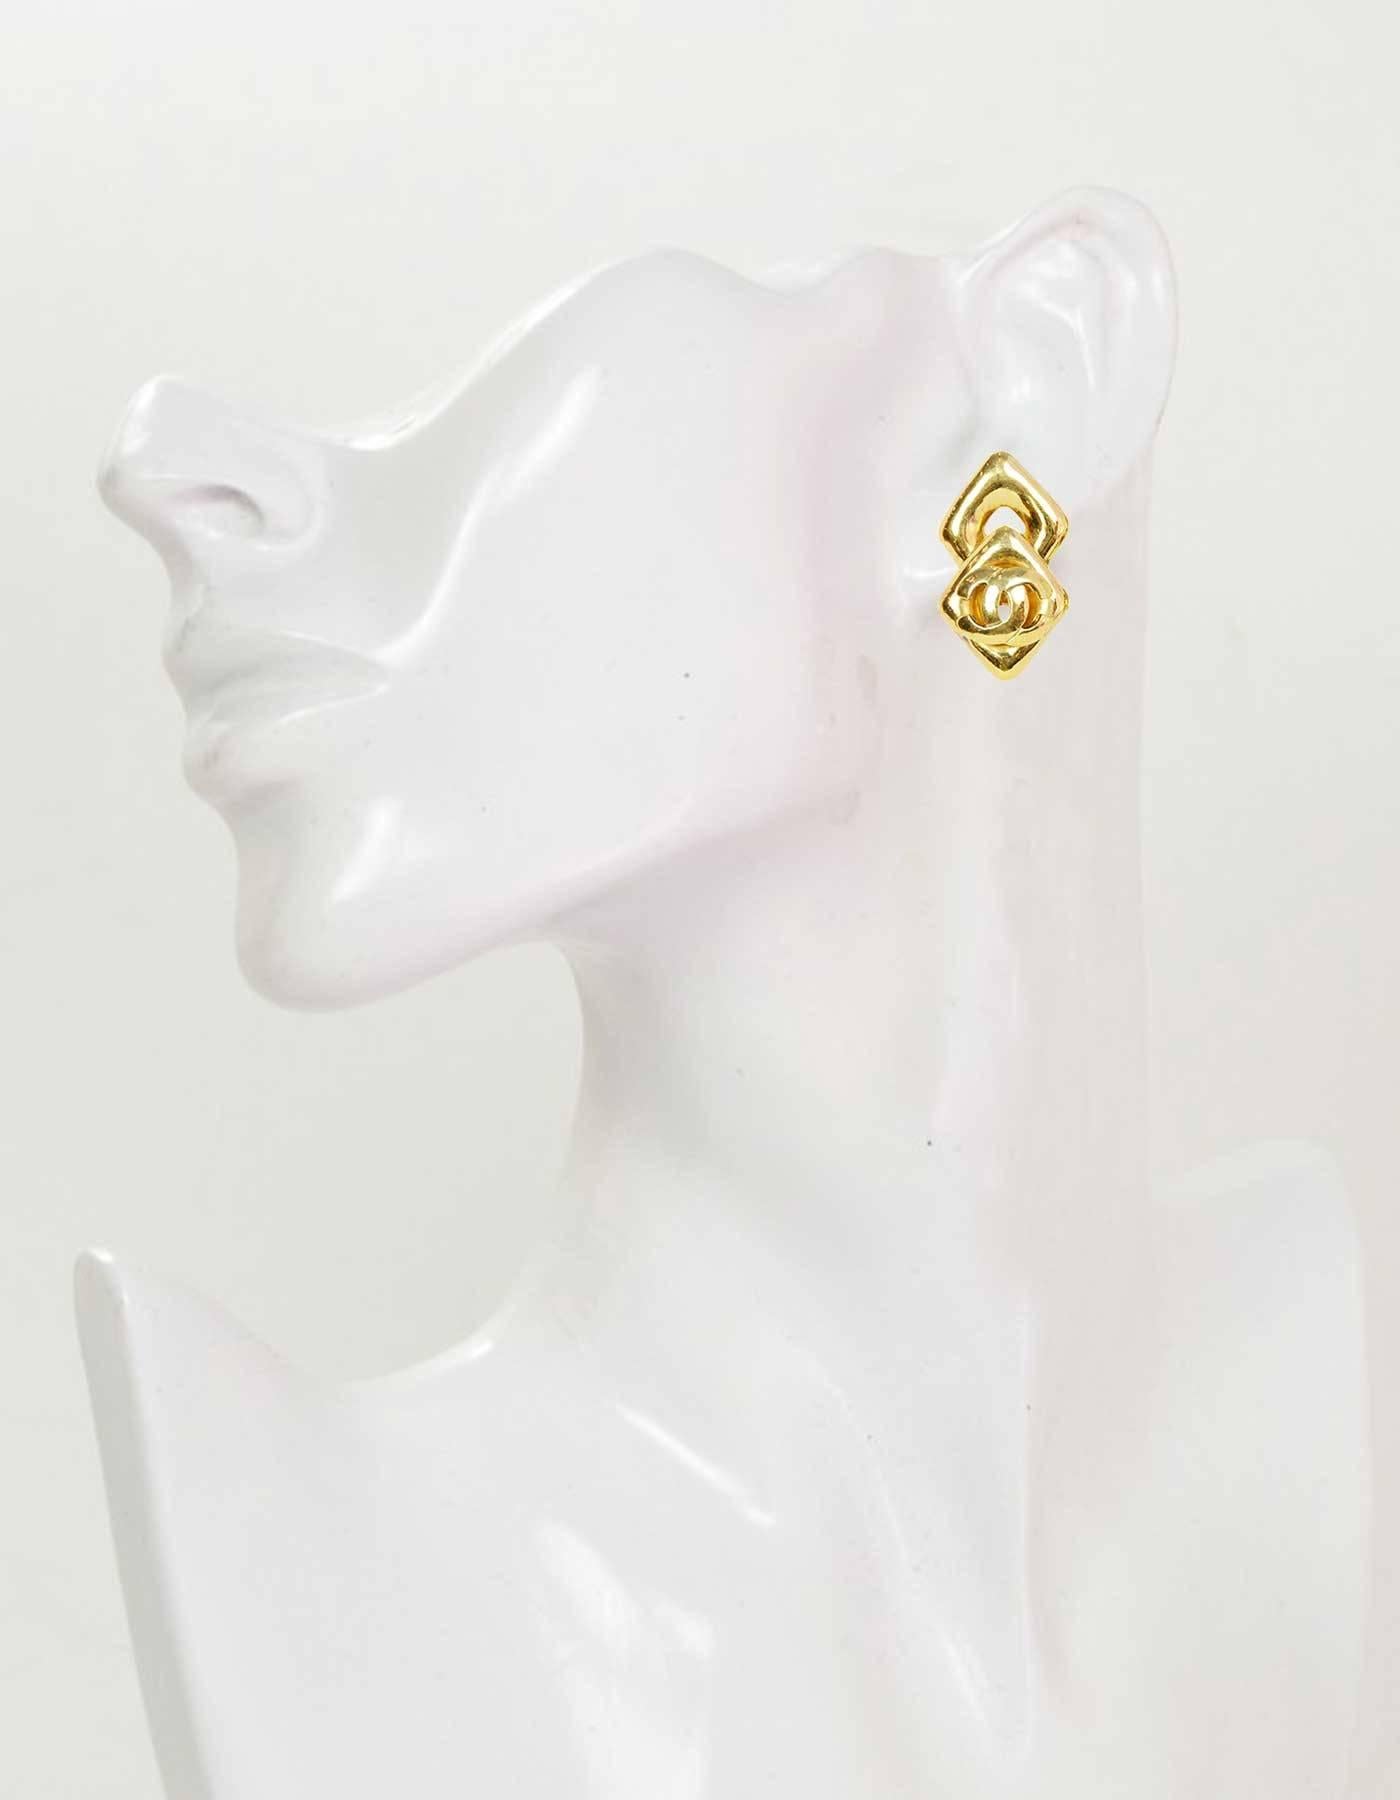 Chanel Vintage '97 Gold Two-Tier Double Diamond CC Clip On Earrings
Features CC's on lower diamonds

Made in: France
Year of Production: 1997
Stamp: 97 CC P
Closure: Clip on
Color: Gold
Materials: Metal
Overall Condition: